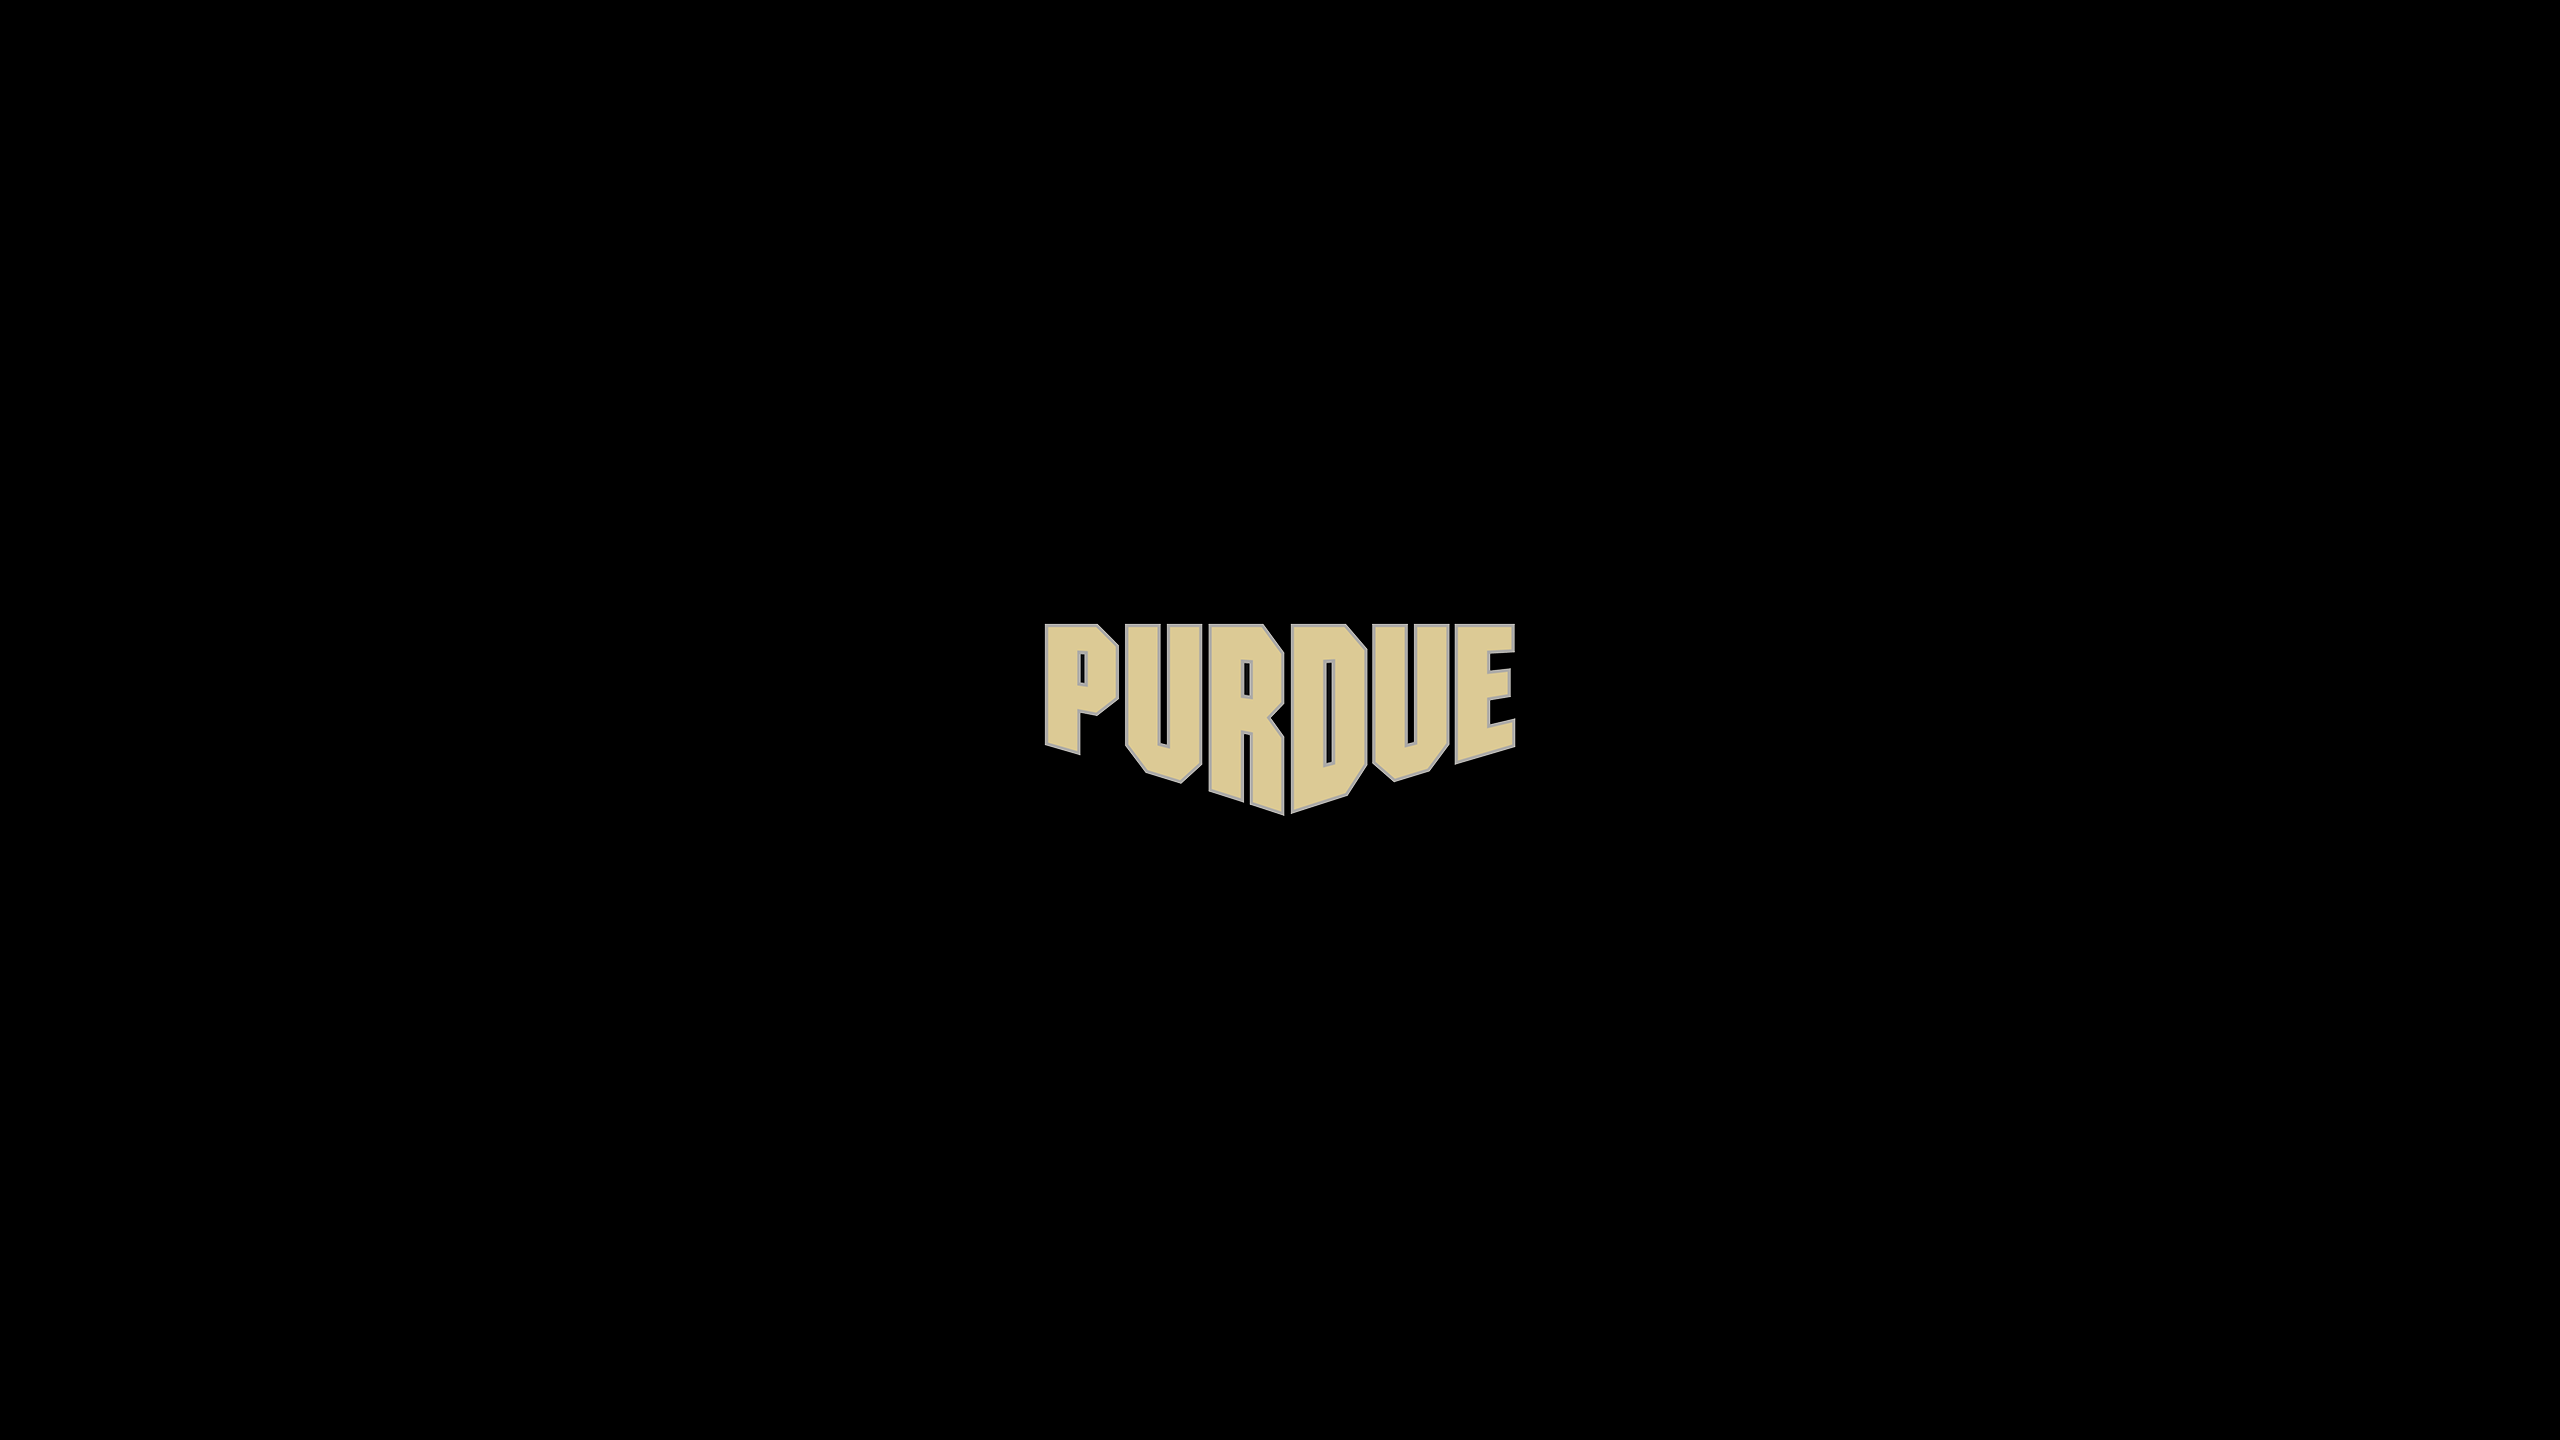 Purdue Boilermakers Basketball - NCAAB - Square Bettor